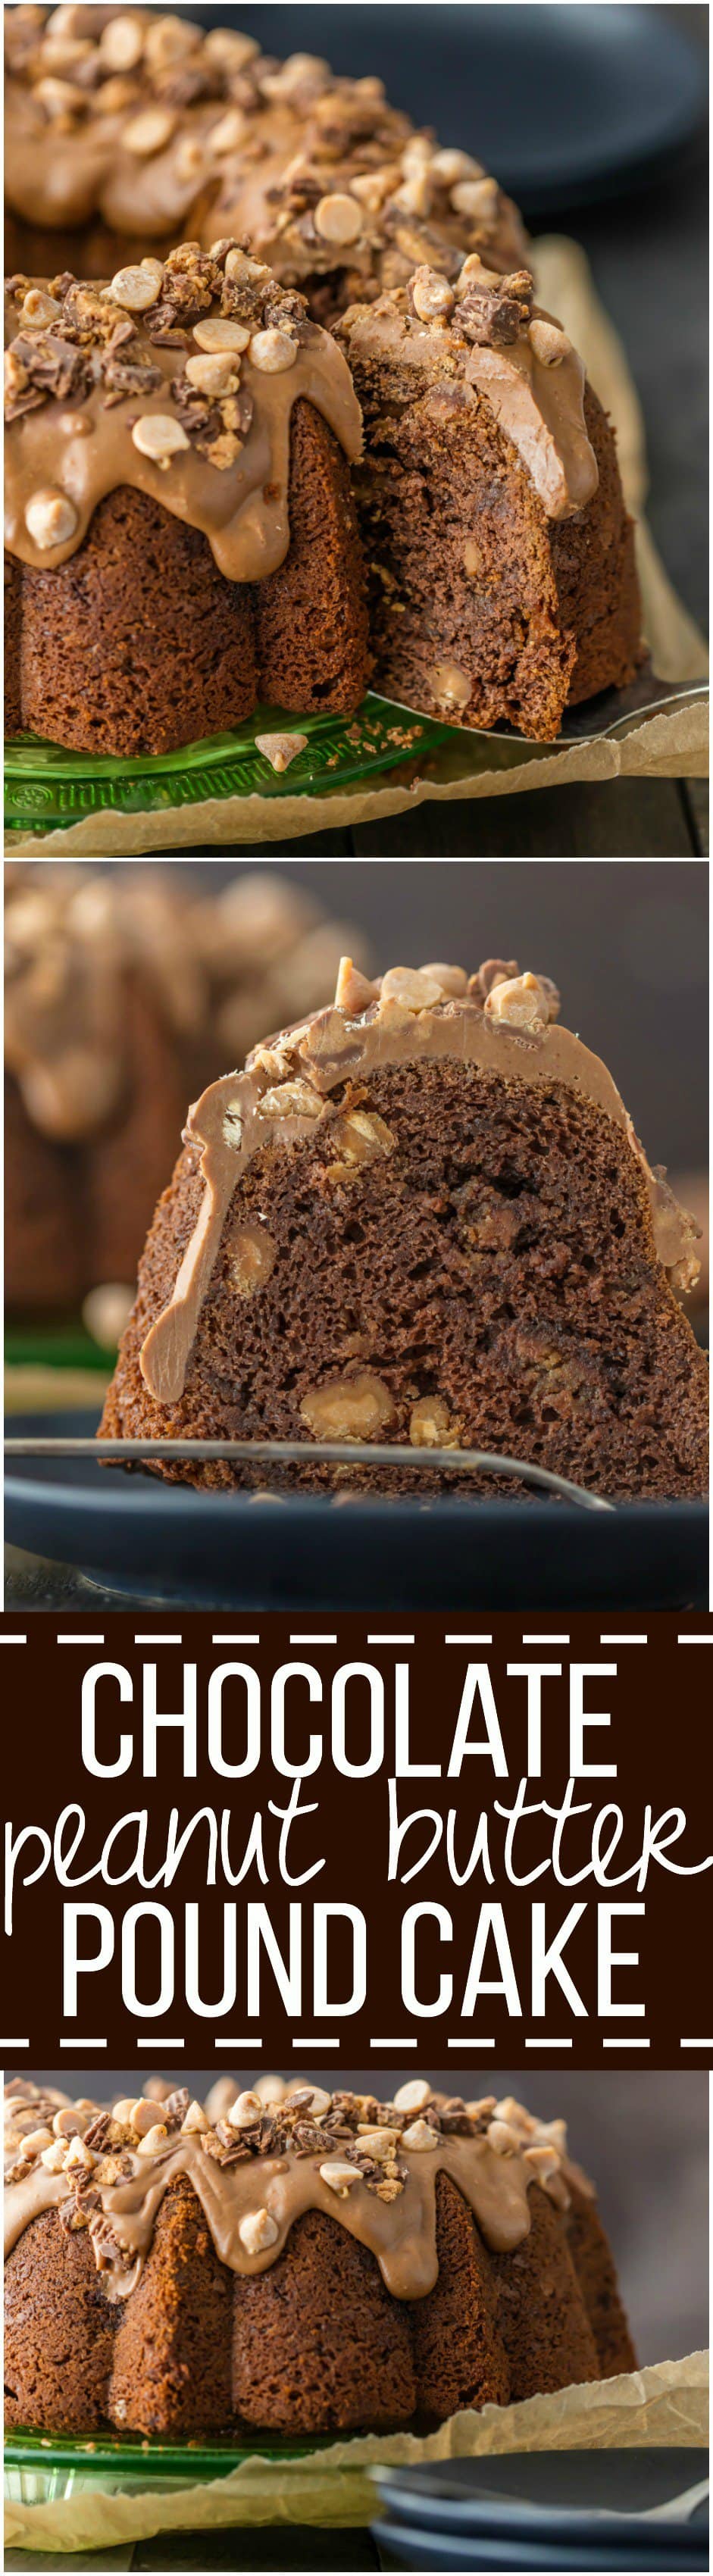 Chocolate Peanut Butter Cake with Peanut Butter Frosting Recipe - The ...